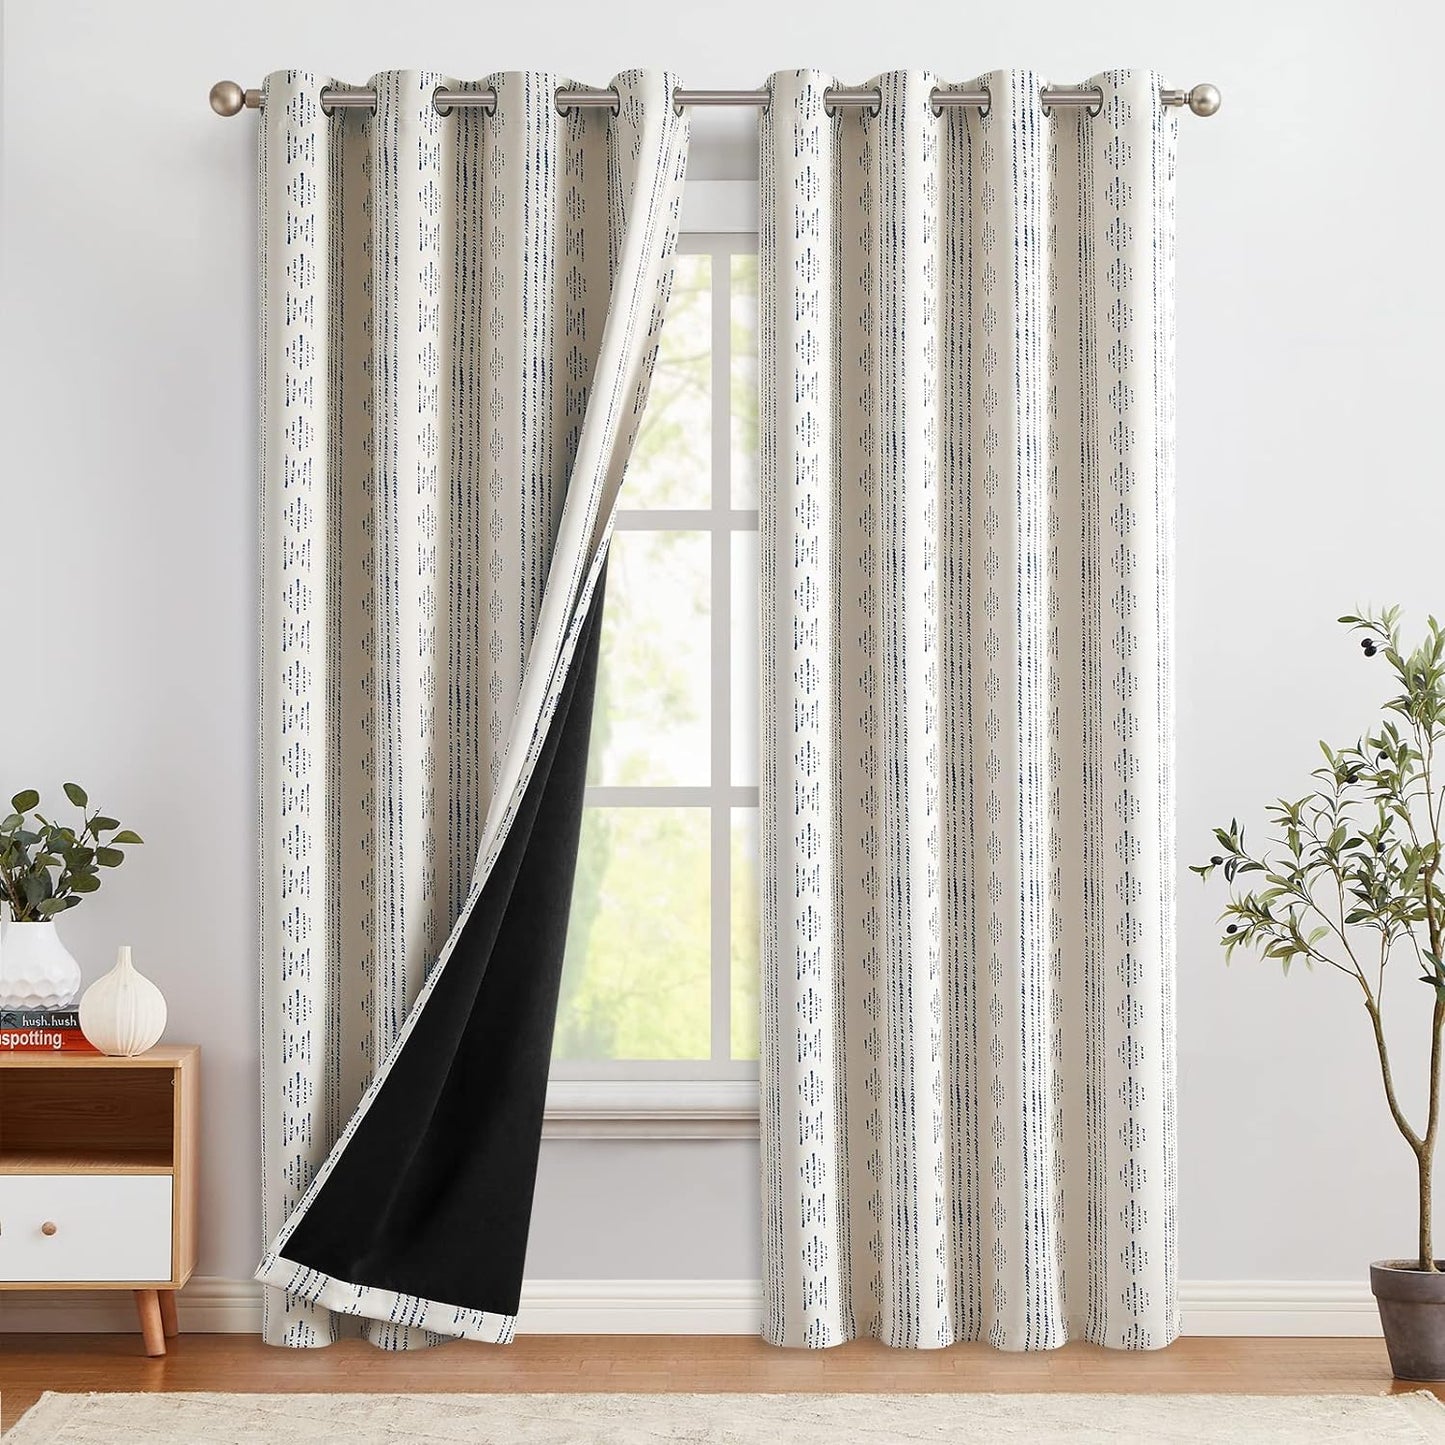 COLLACT 100% Boho Blackout Curtains for Bedroom 84 Inch Length Black on Beige Geometric Stripe Pattern Curtains for Living Room Thermal Insulated Room Darkening Drapes Grommet Window Curtains 2 Panels  COLLACT A1 | Blue On Beige W52 X L90 